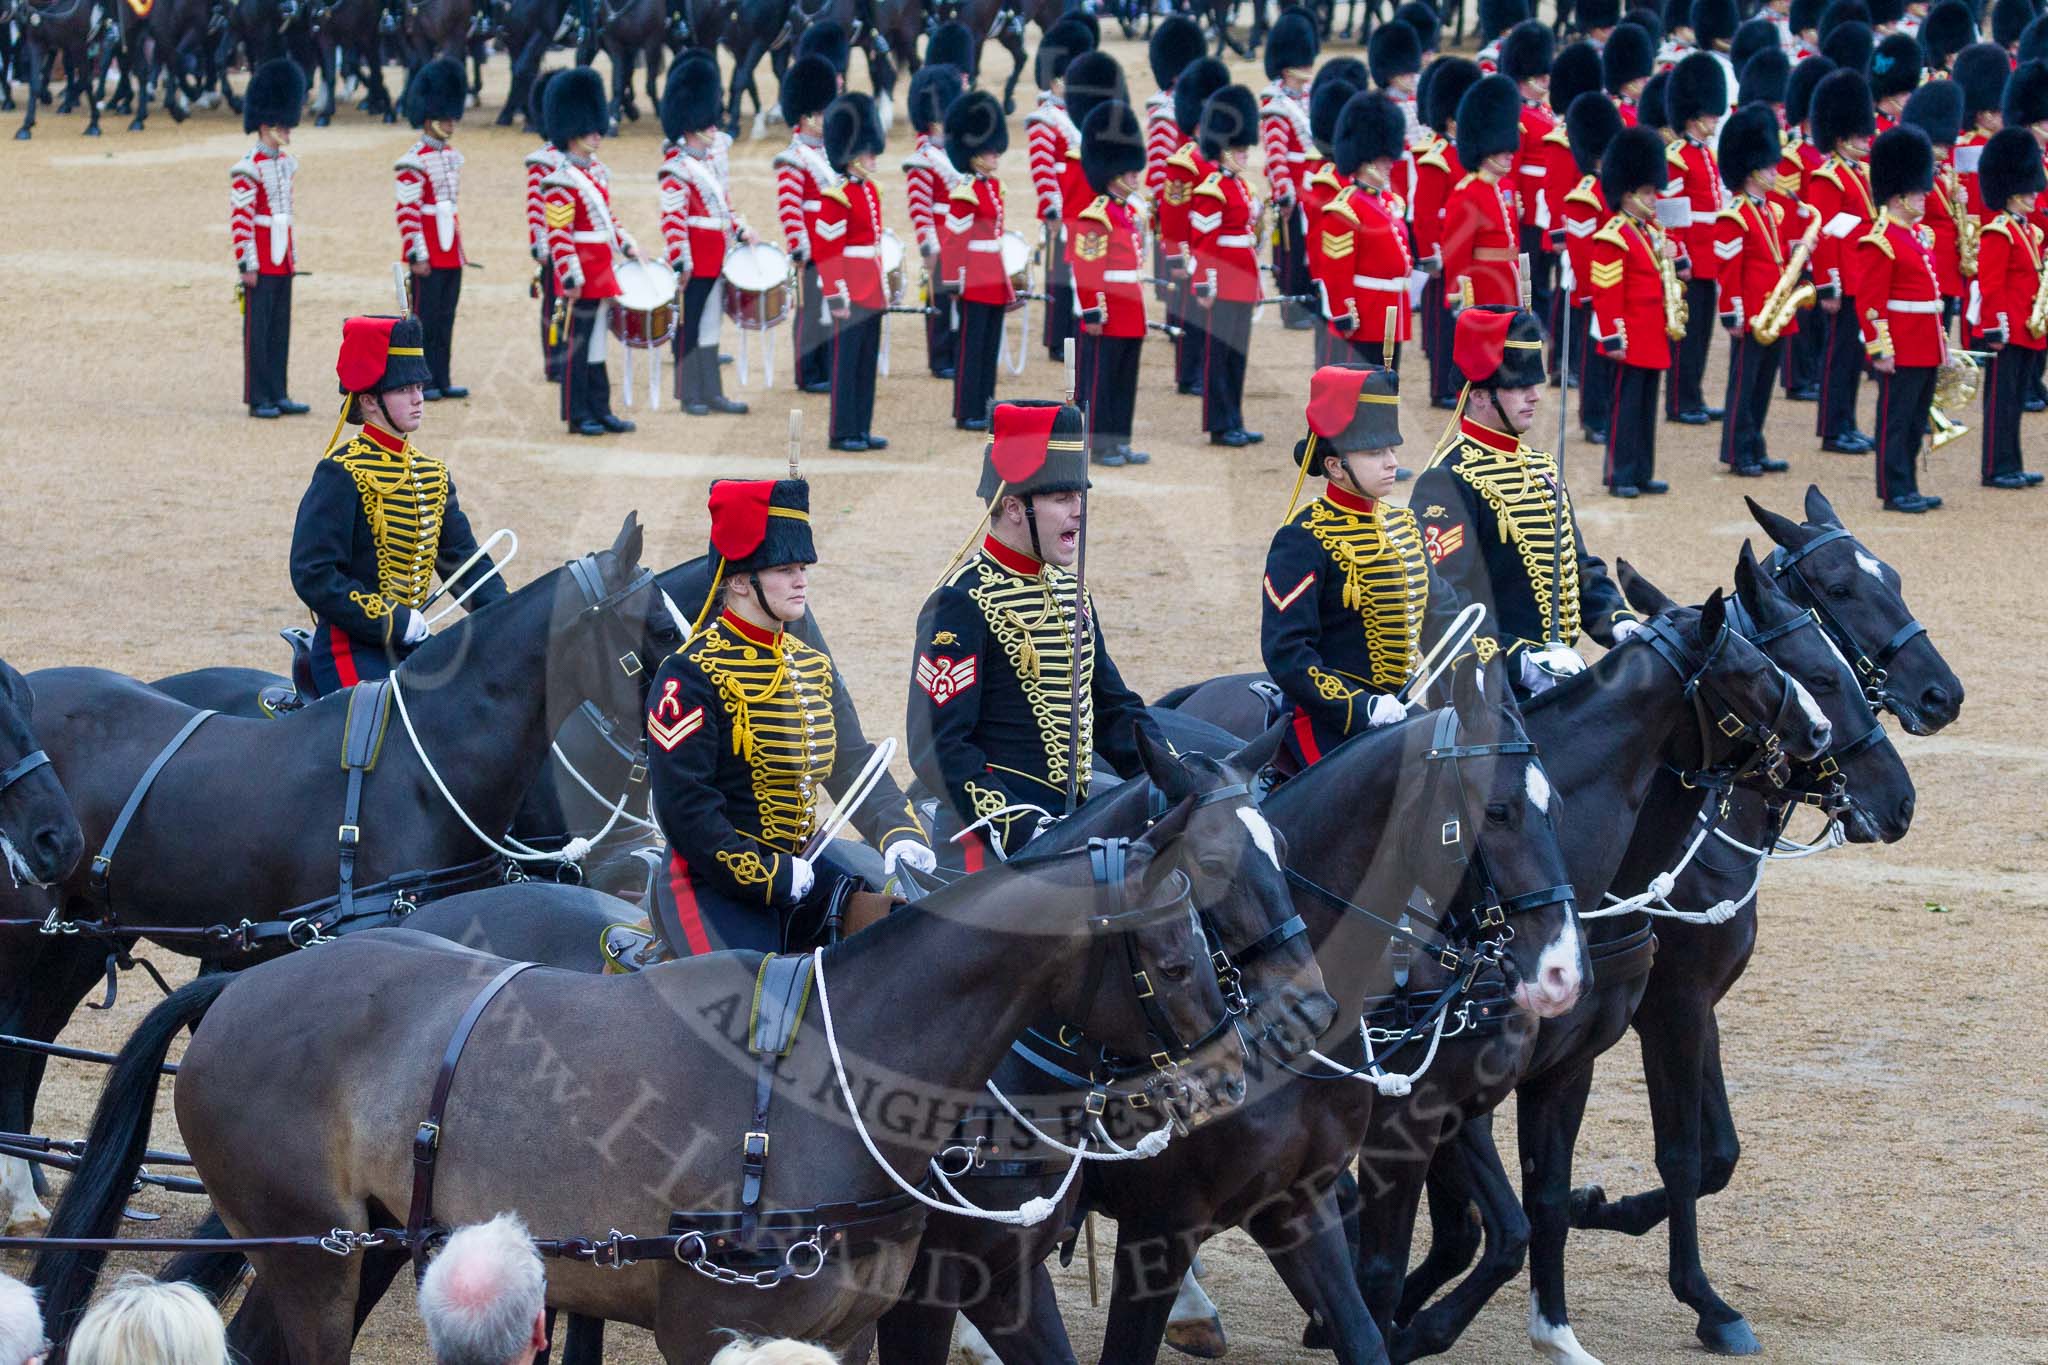 Trooping the Colour 2015. Image #544, 13 June 2015 11:53 Horse Guards Parade, London, UK